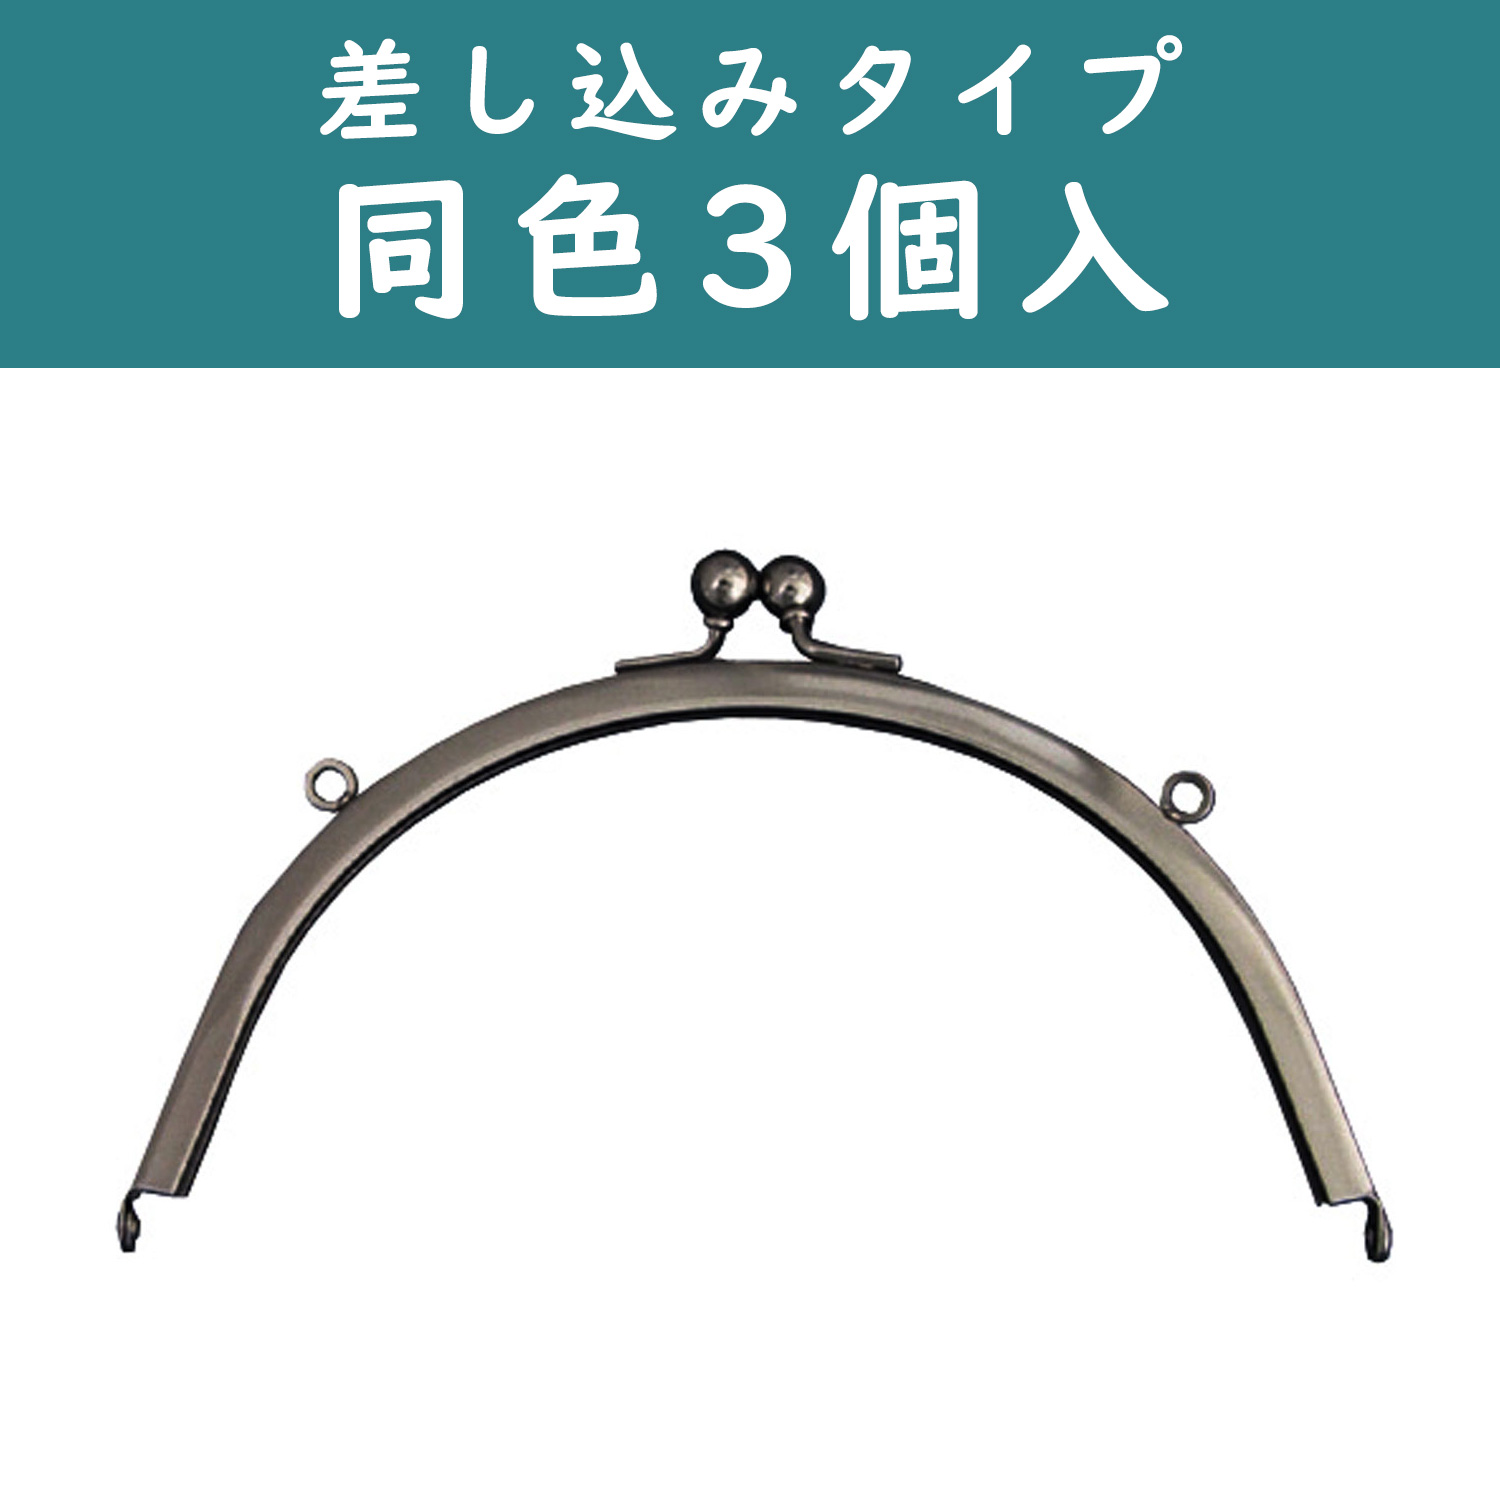 SK8-B-3 Purse Frame""", with loops""", 3pcs (pack)